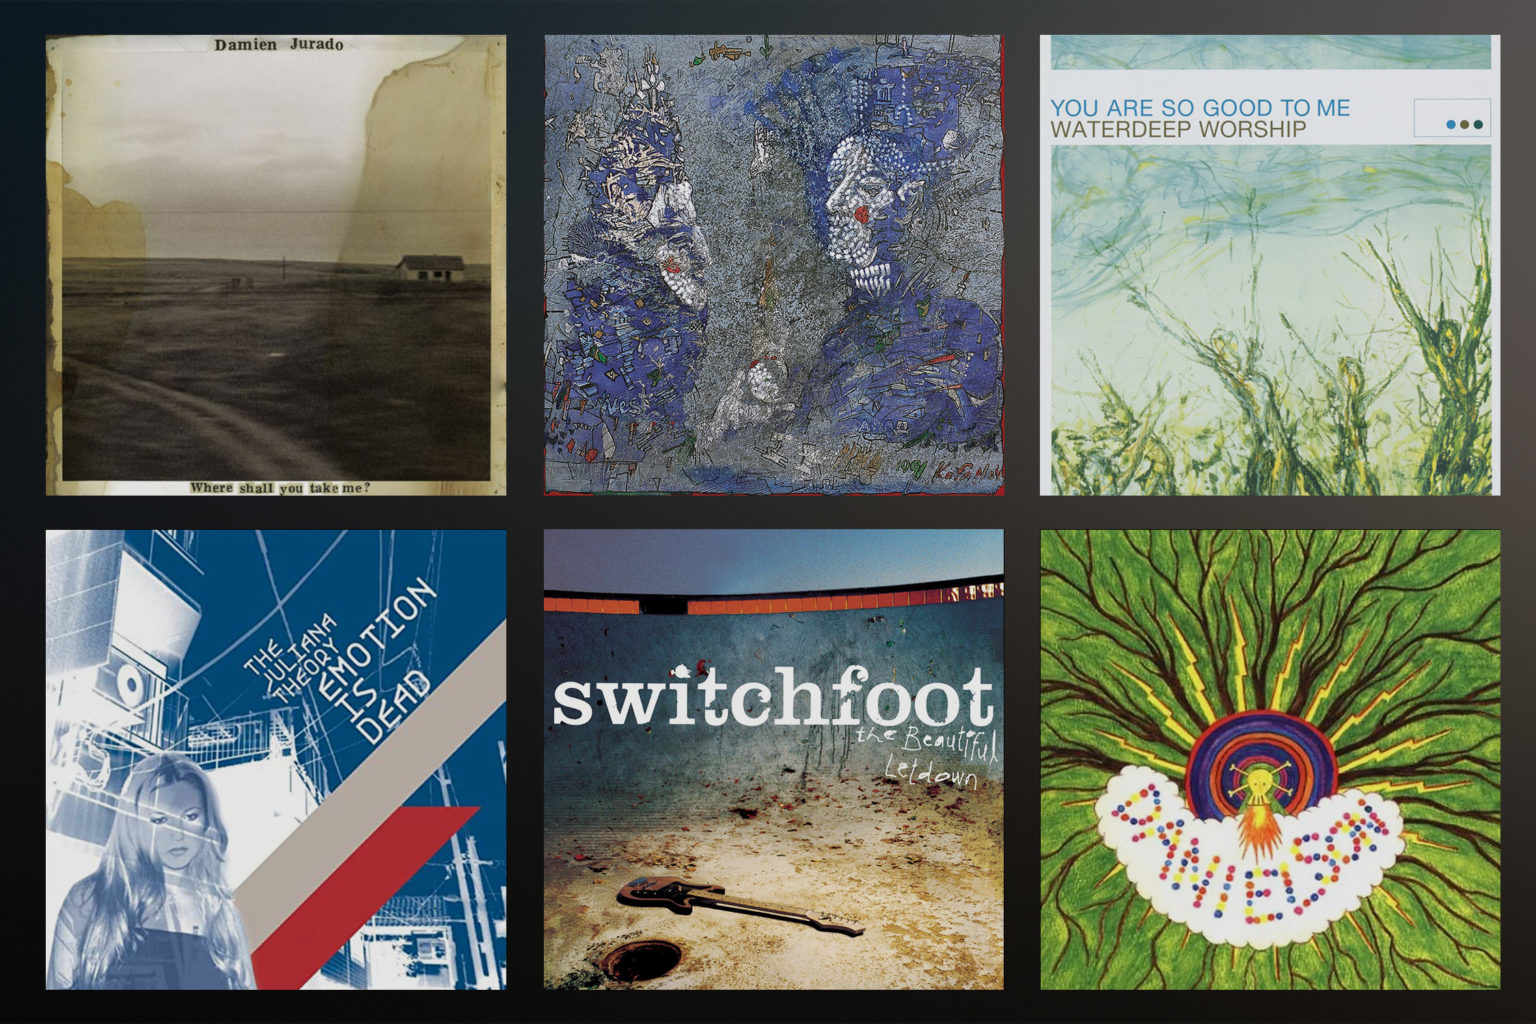 10 Early ‘00s Christian Indie Rock Albums that Still Hold Up - RELEVANT